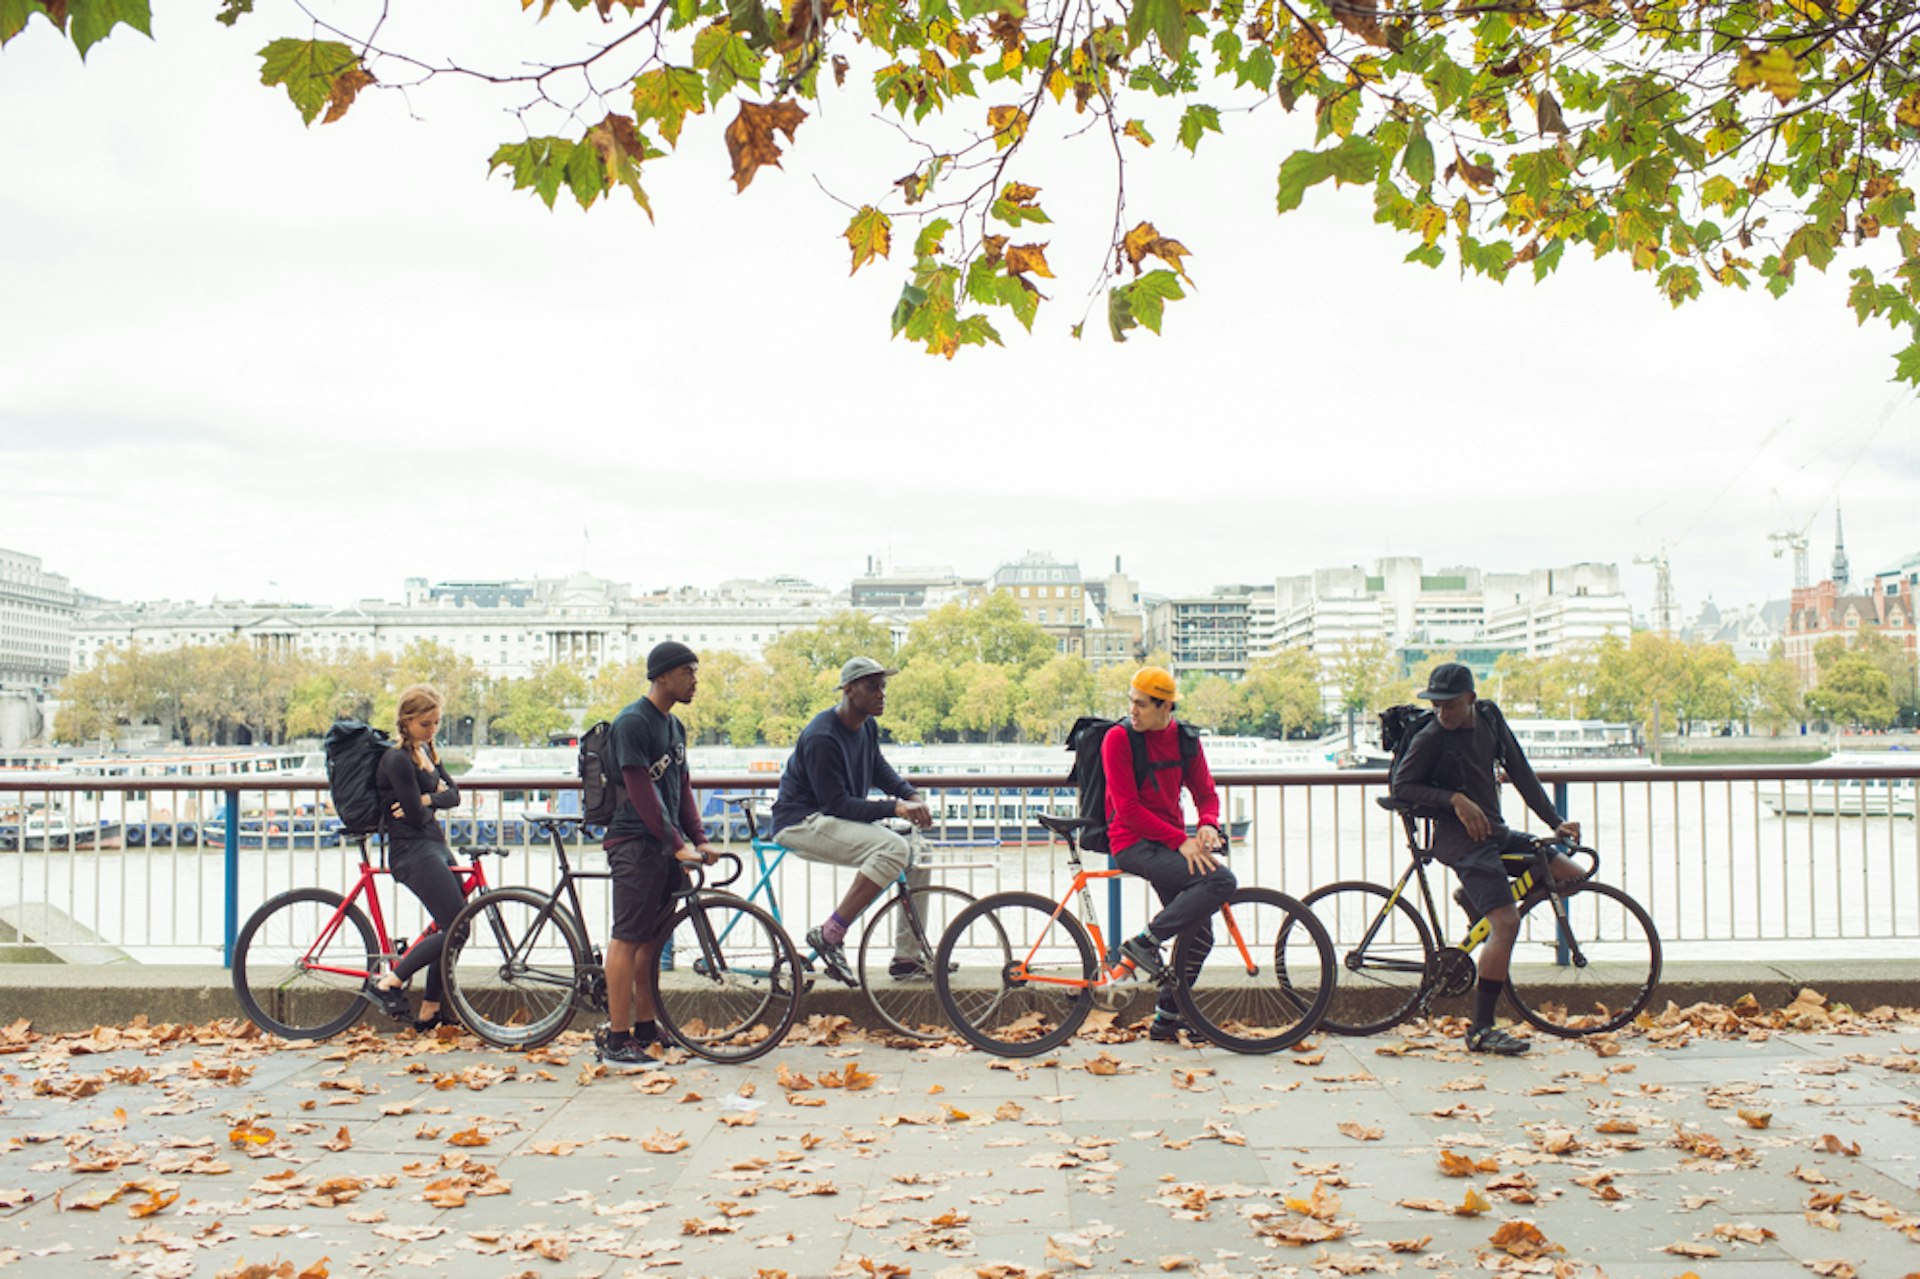 Join Fixed Gear London and embrace winter riding with UNIQLO's HEATTECH collection